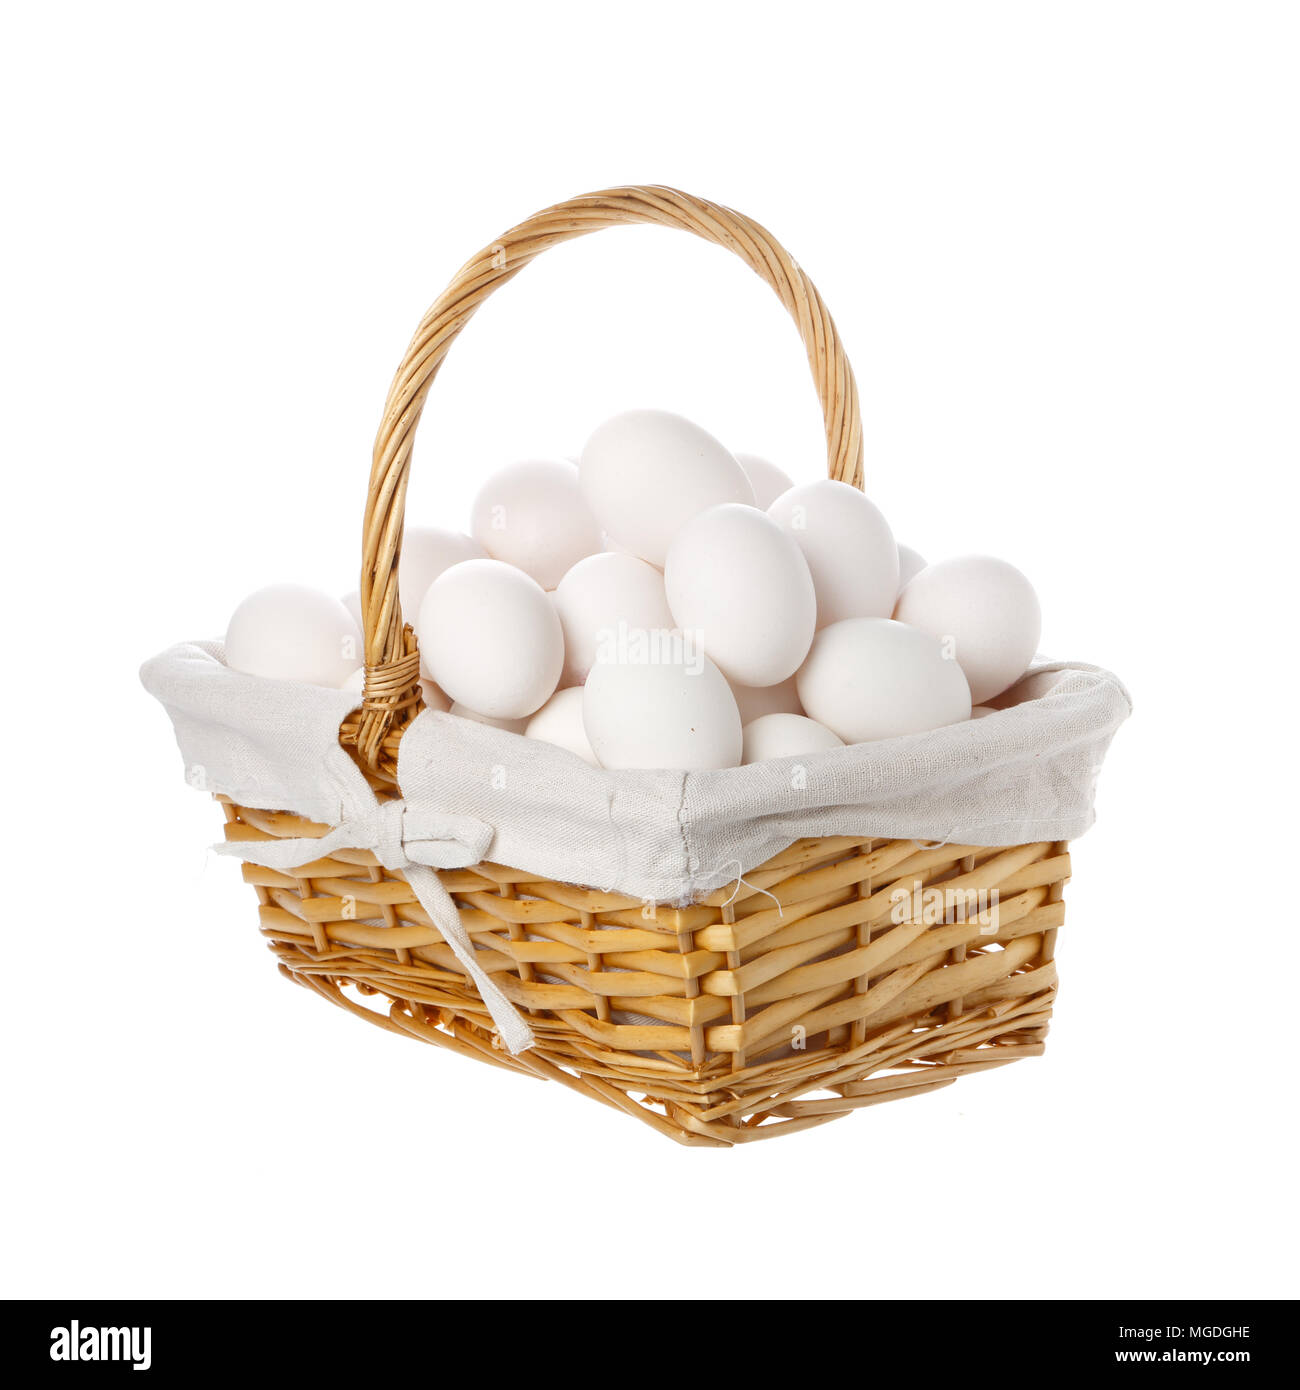 A large group of hen eggs collected in a basket with handle isolated on white background. Stock Photo